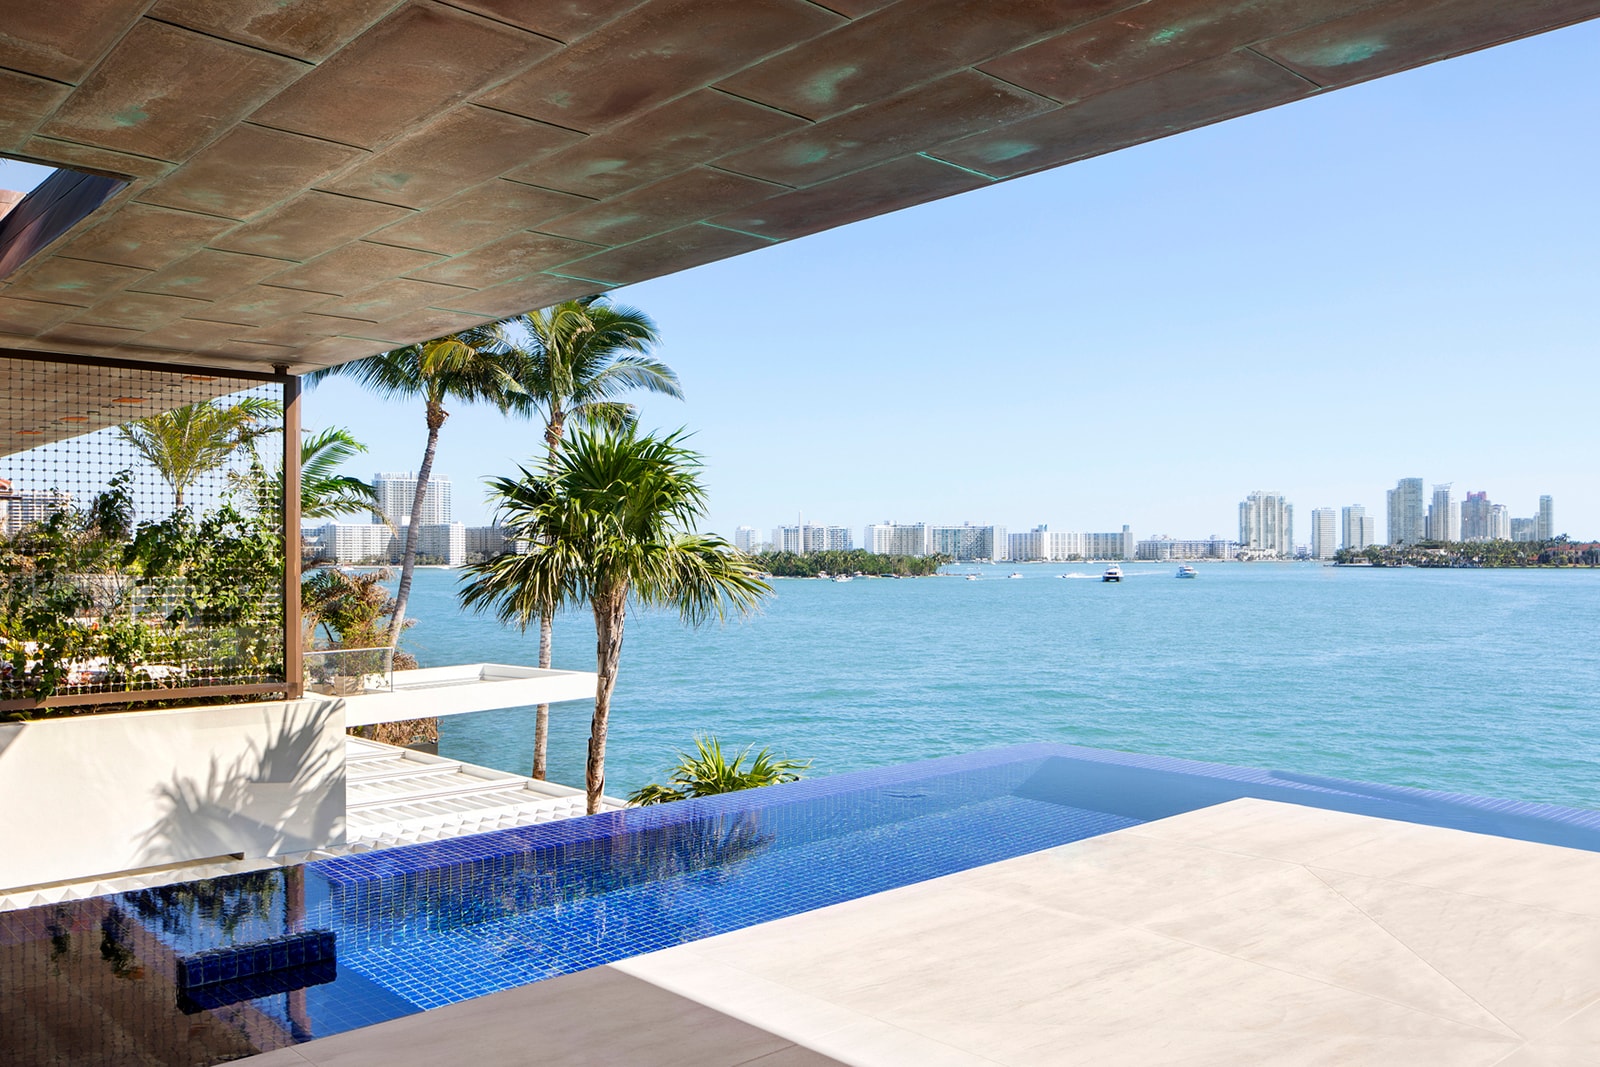 Dilido House by SAOTA in Miami United States of America Homes Houses Modern Interior Exterior Swimming Pool Architects Architecture